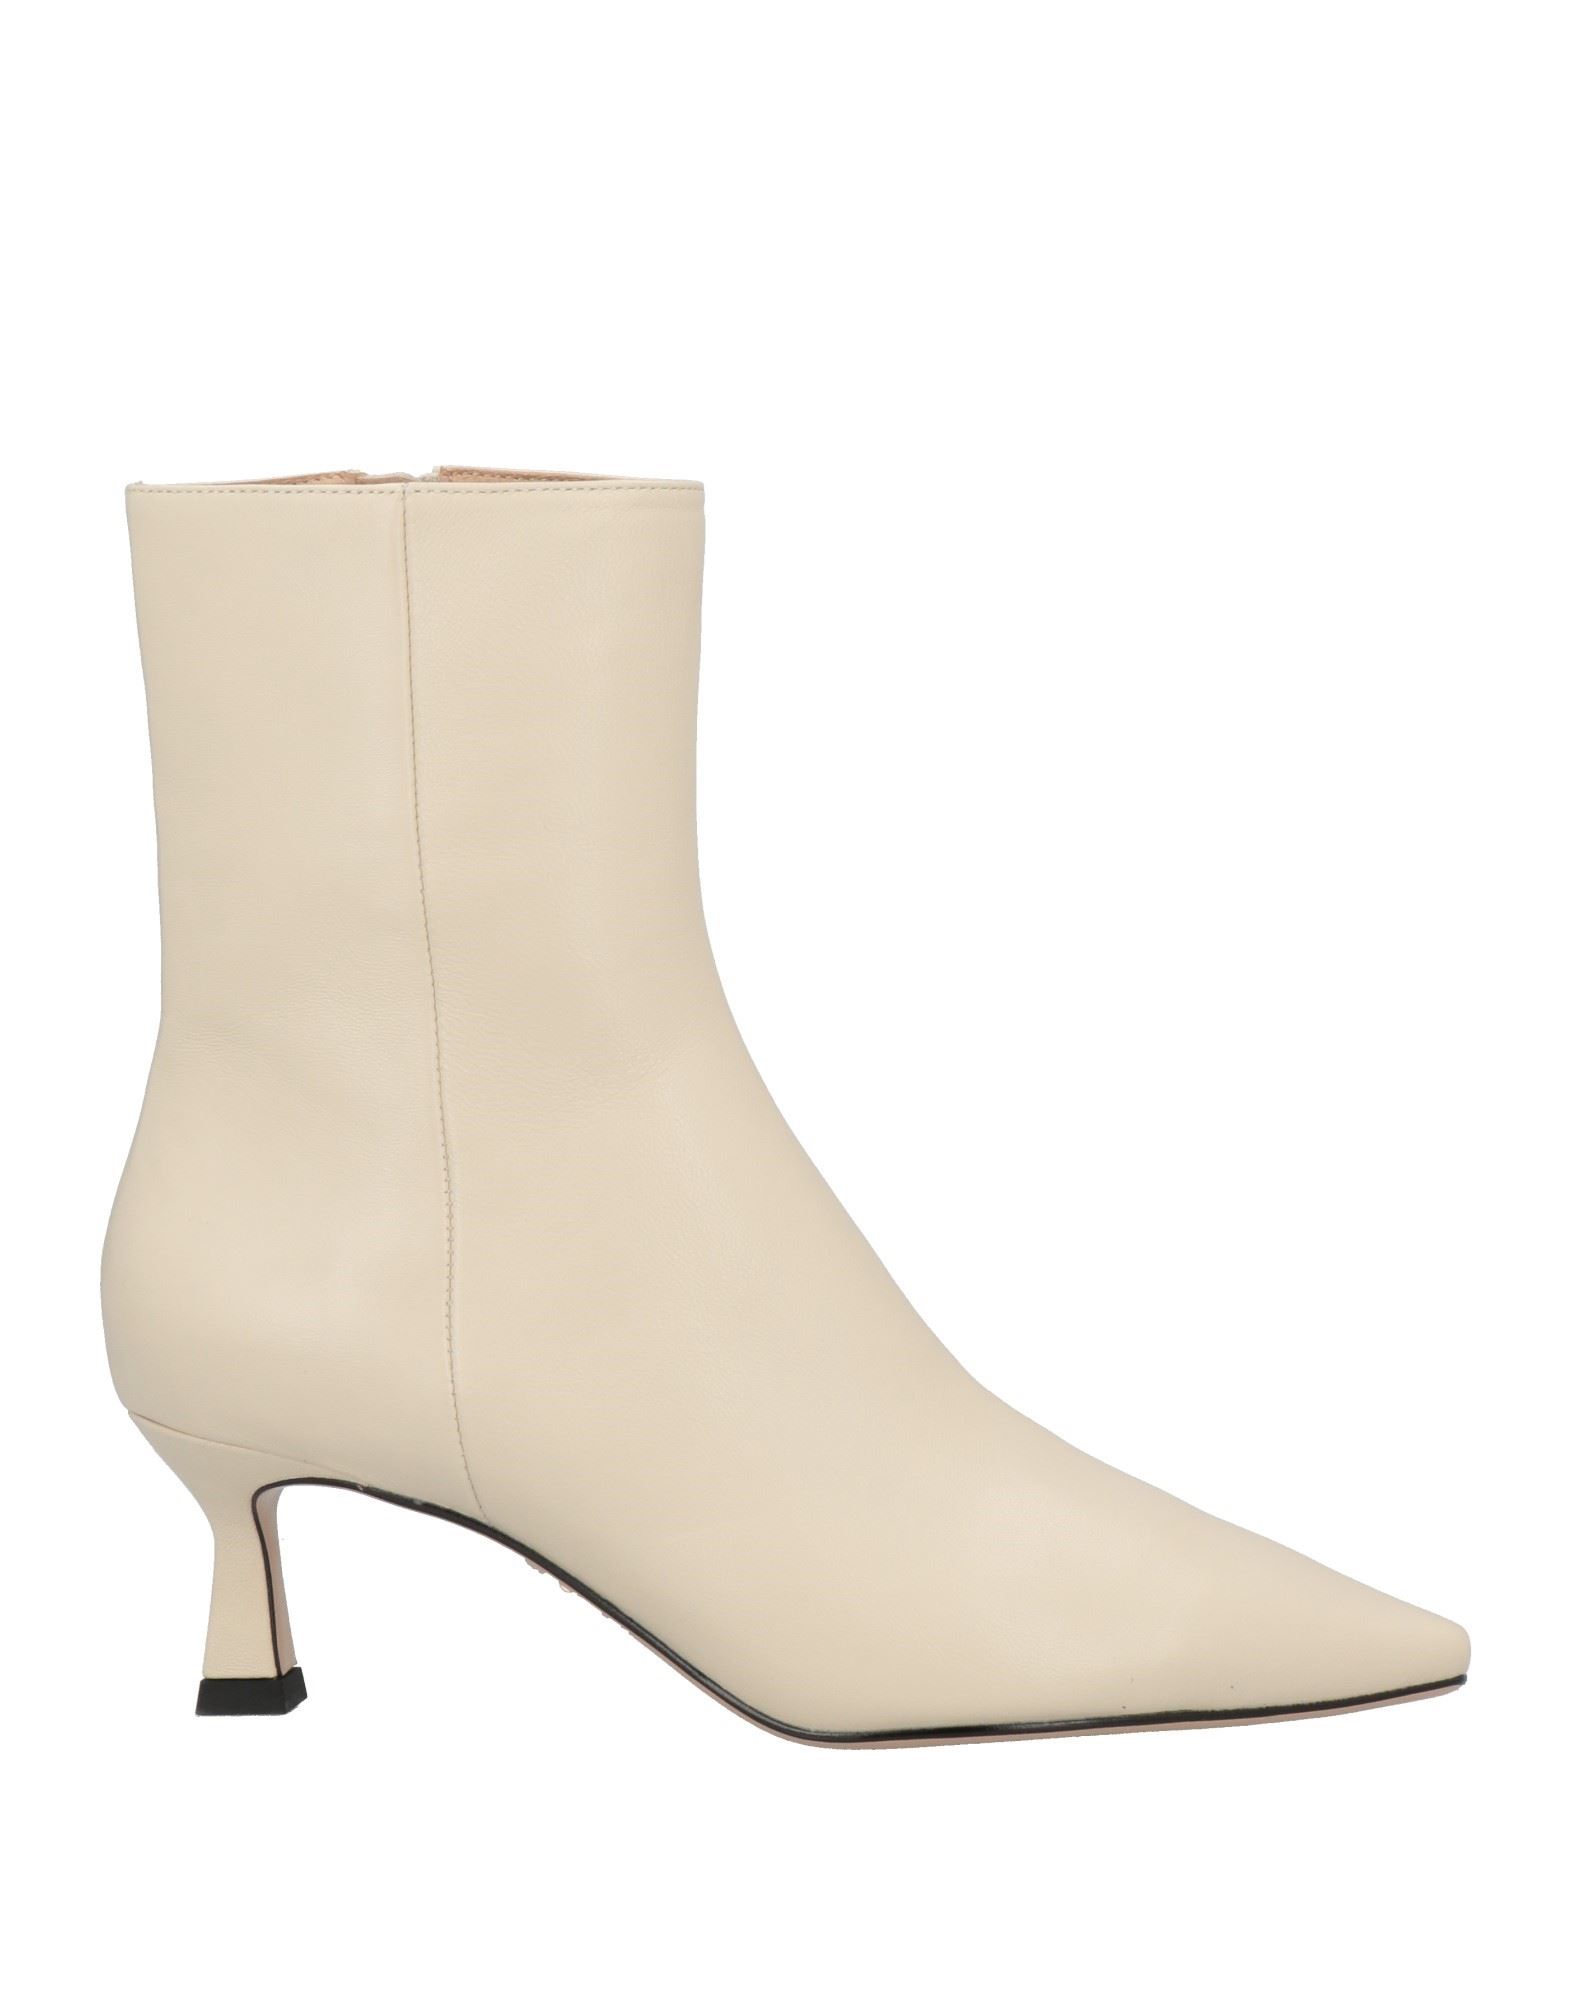 Lola Cruz Ankle Boots In Grey